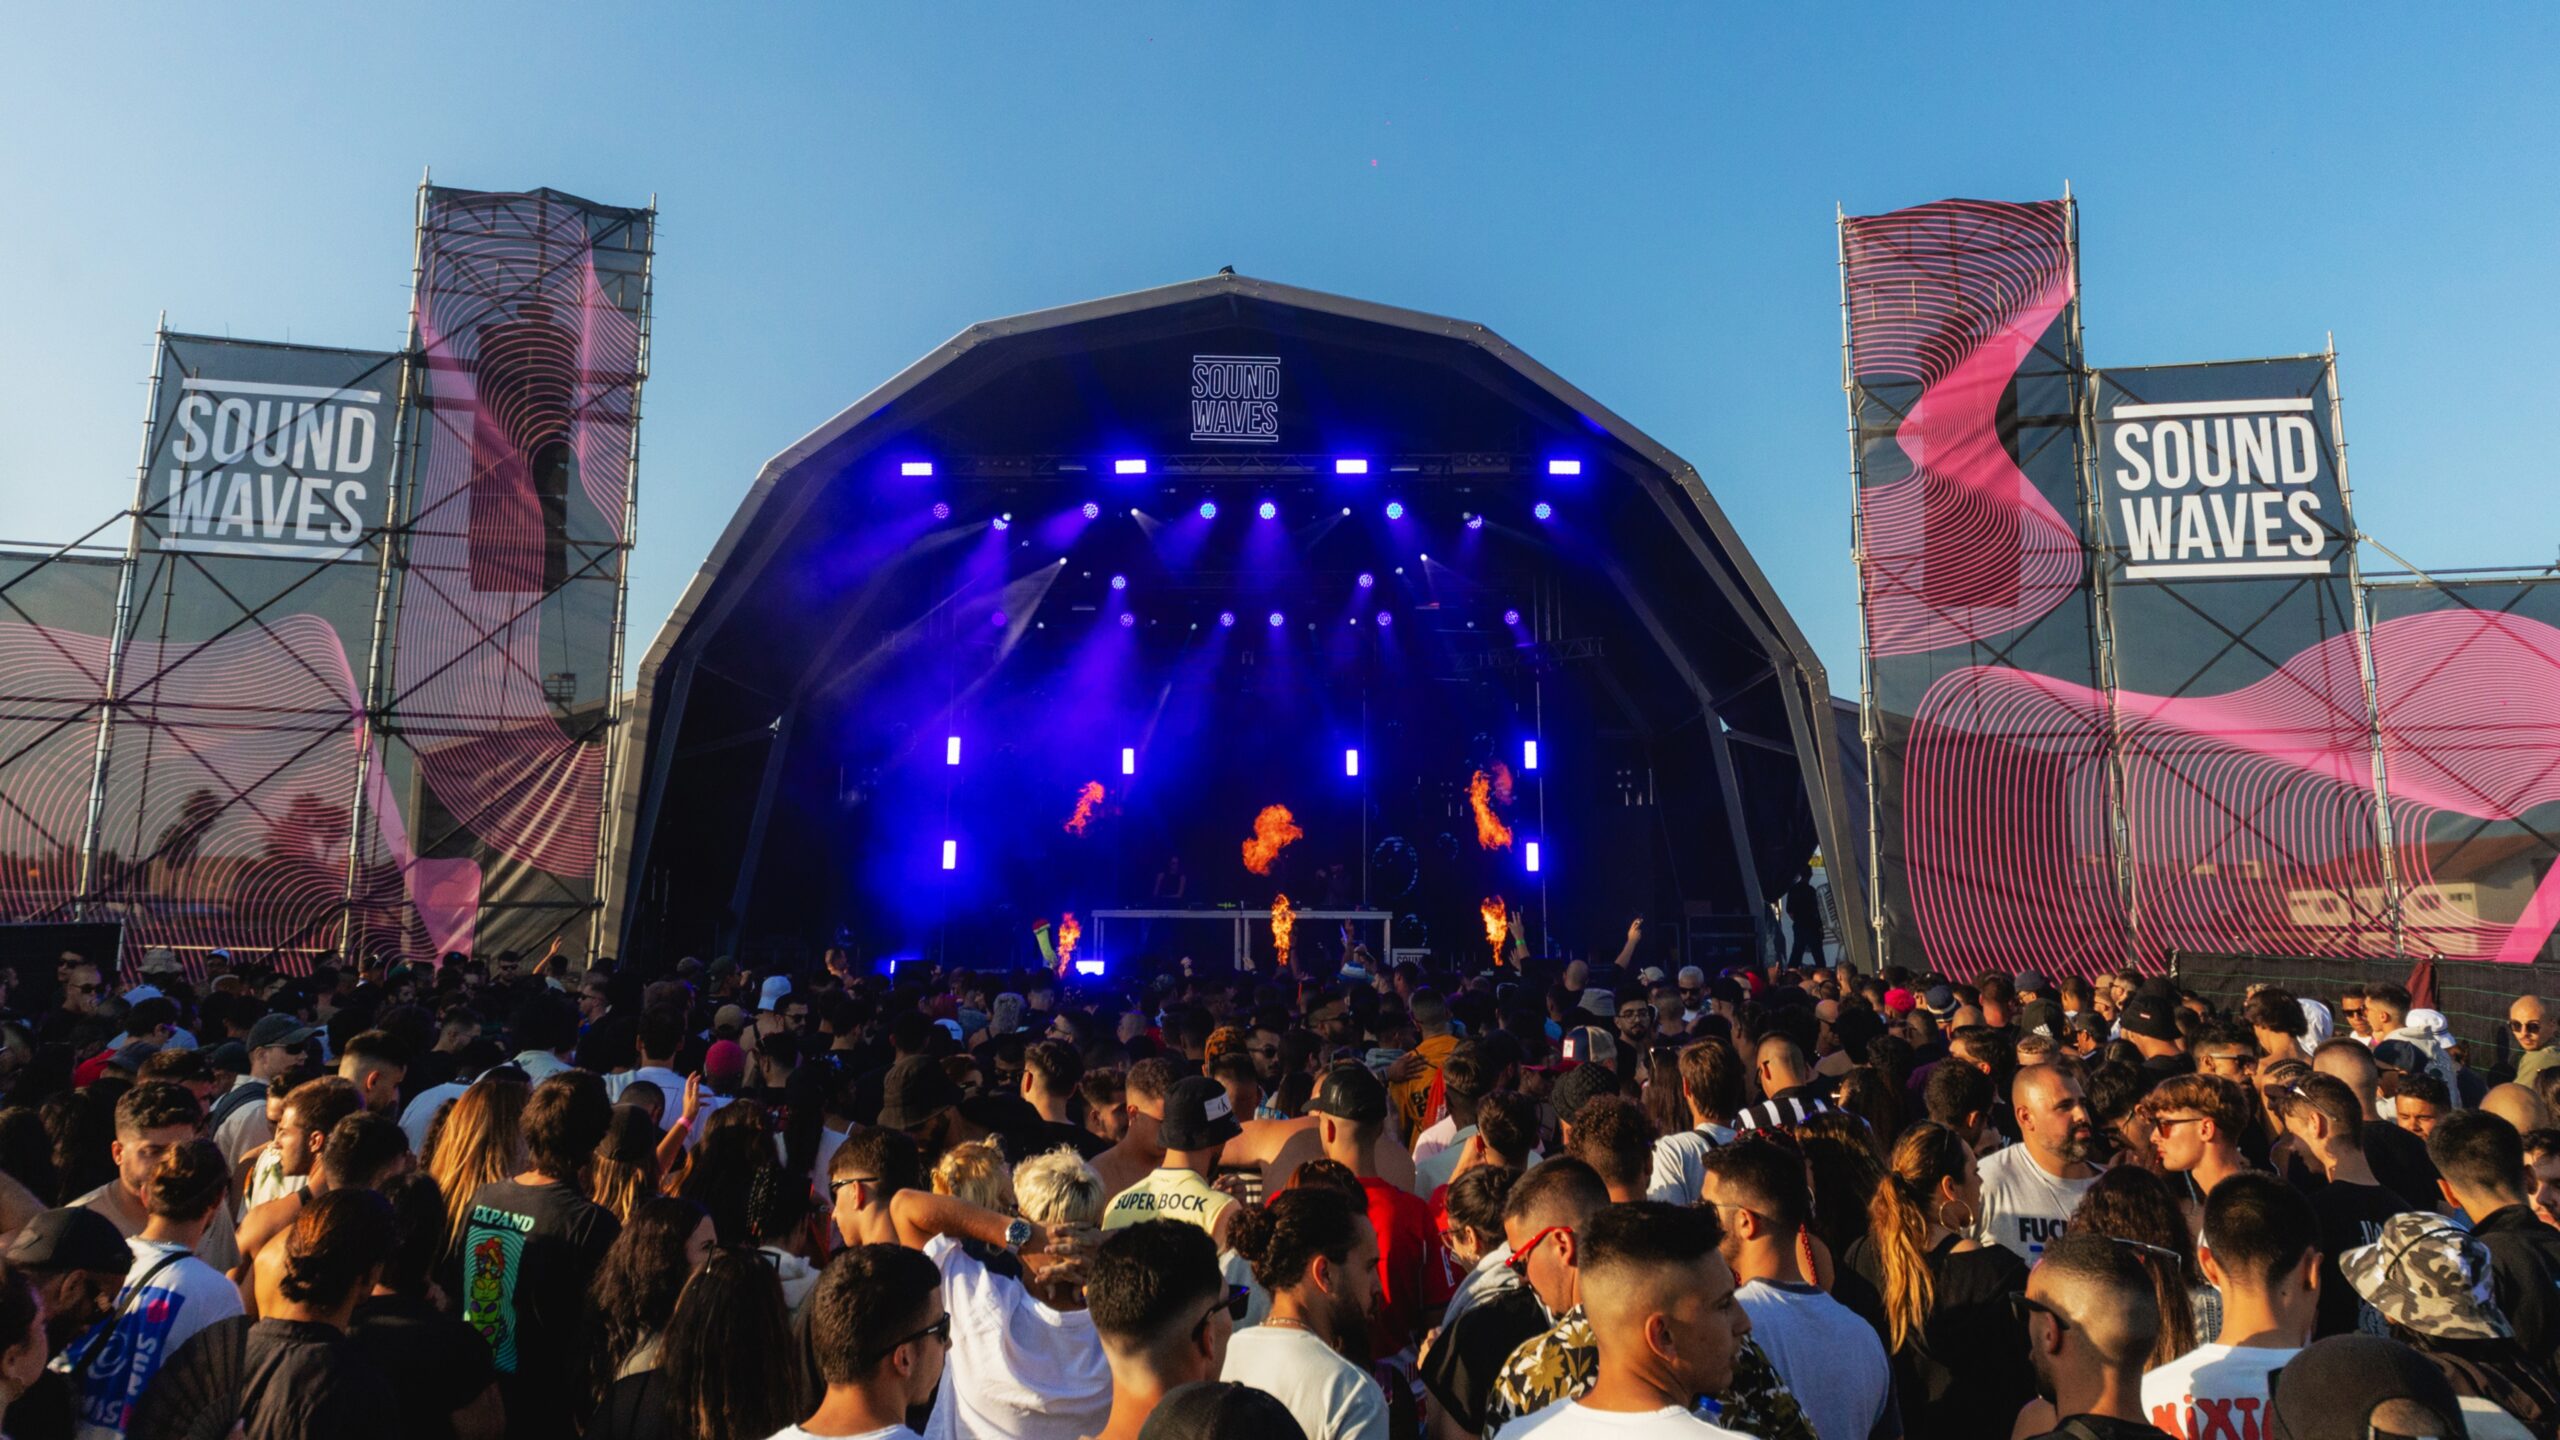 Sound Waves from Portugal Launches Aftermovie